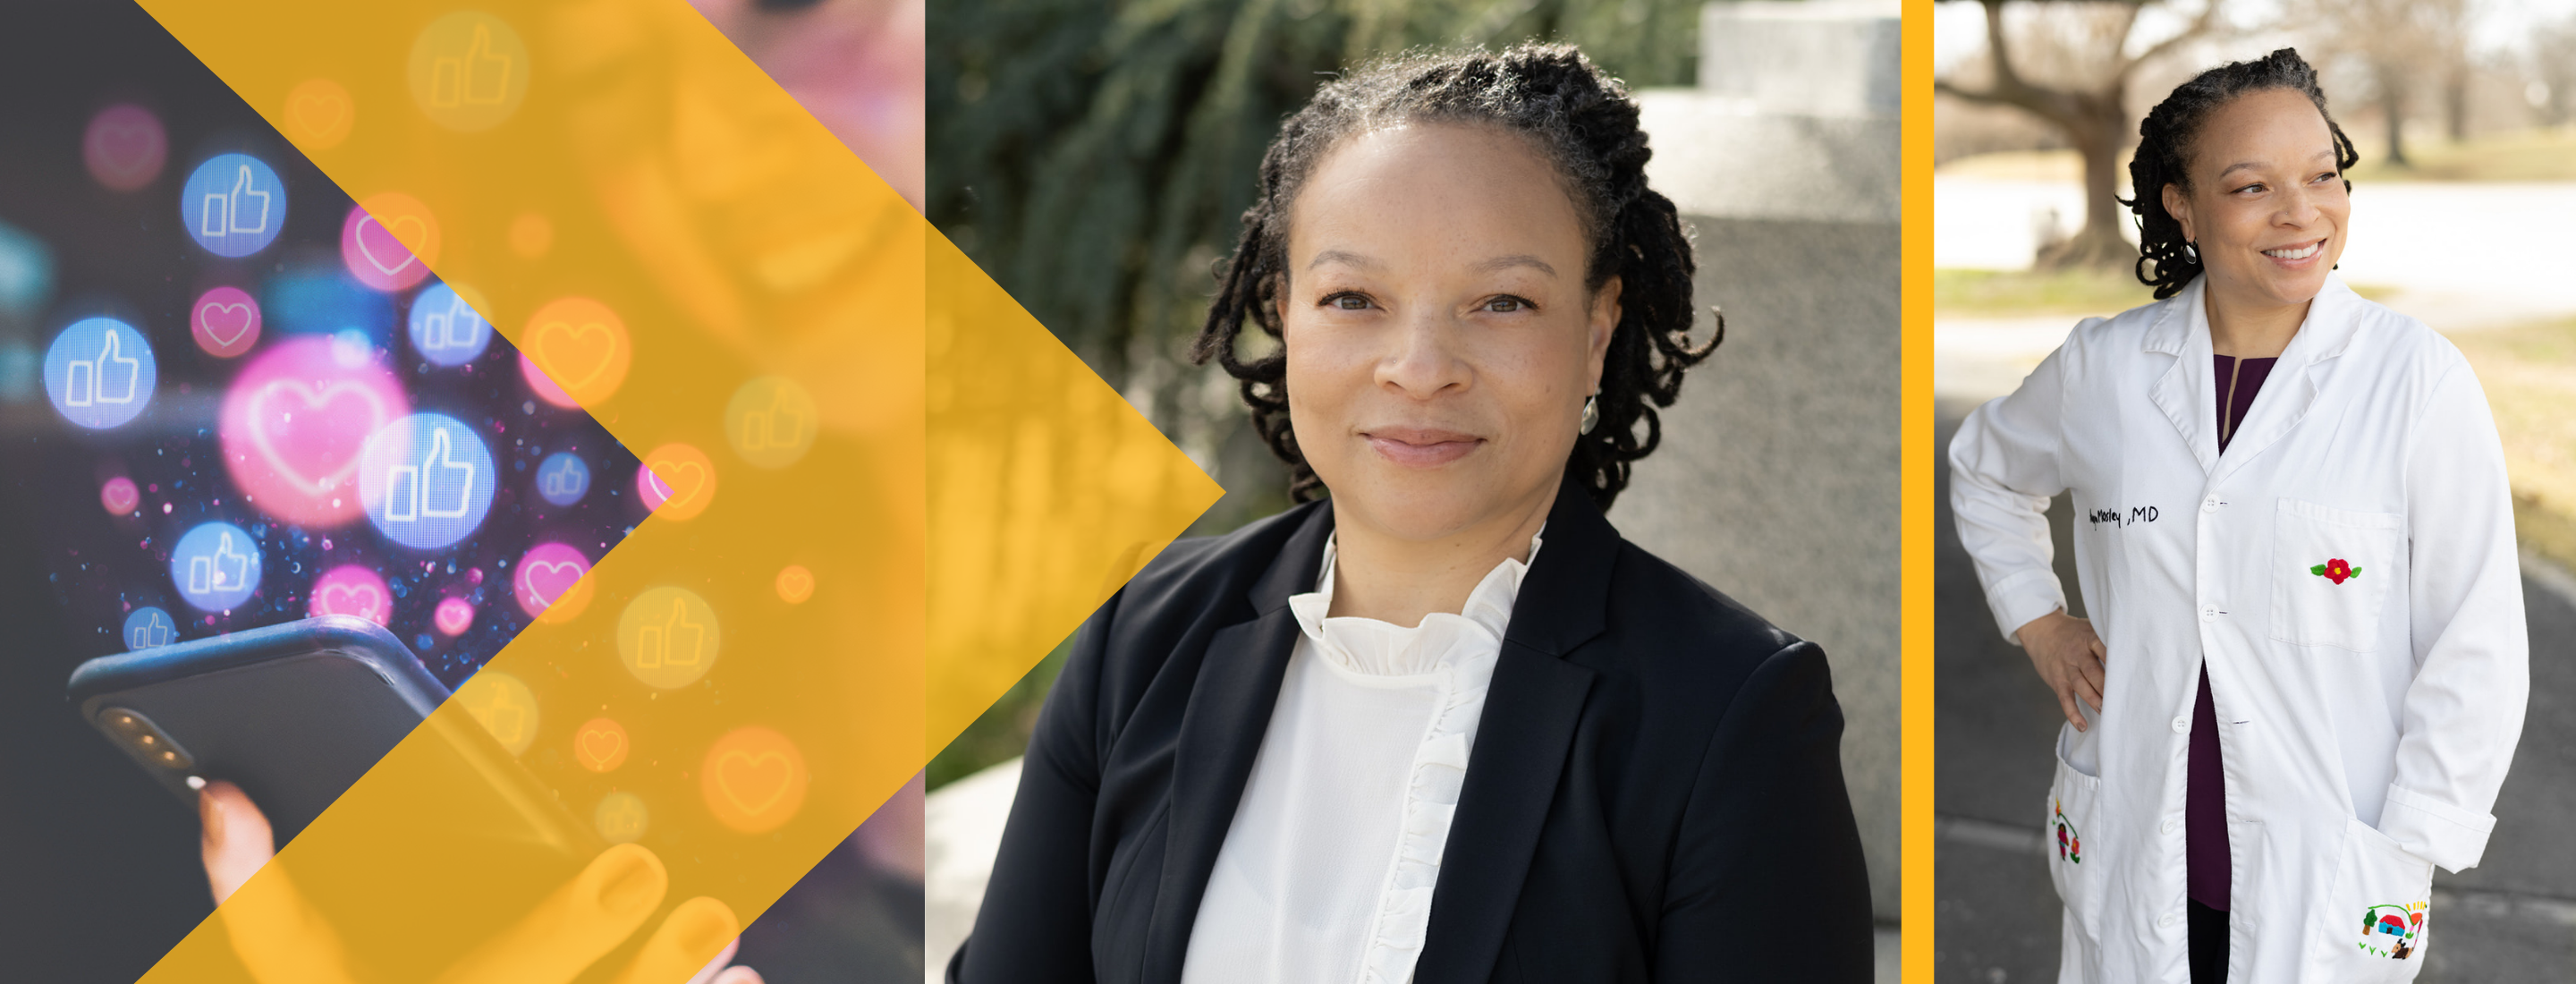 Three images next to one another with a yellow arrow combining them. The first image is of a phone with social media icons floating above. The second and third images are of Dr. Raegan McDonald-Mosley. 